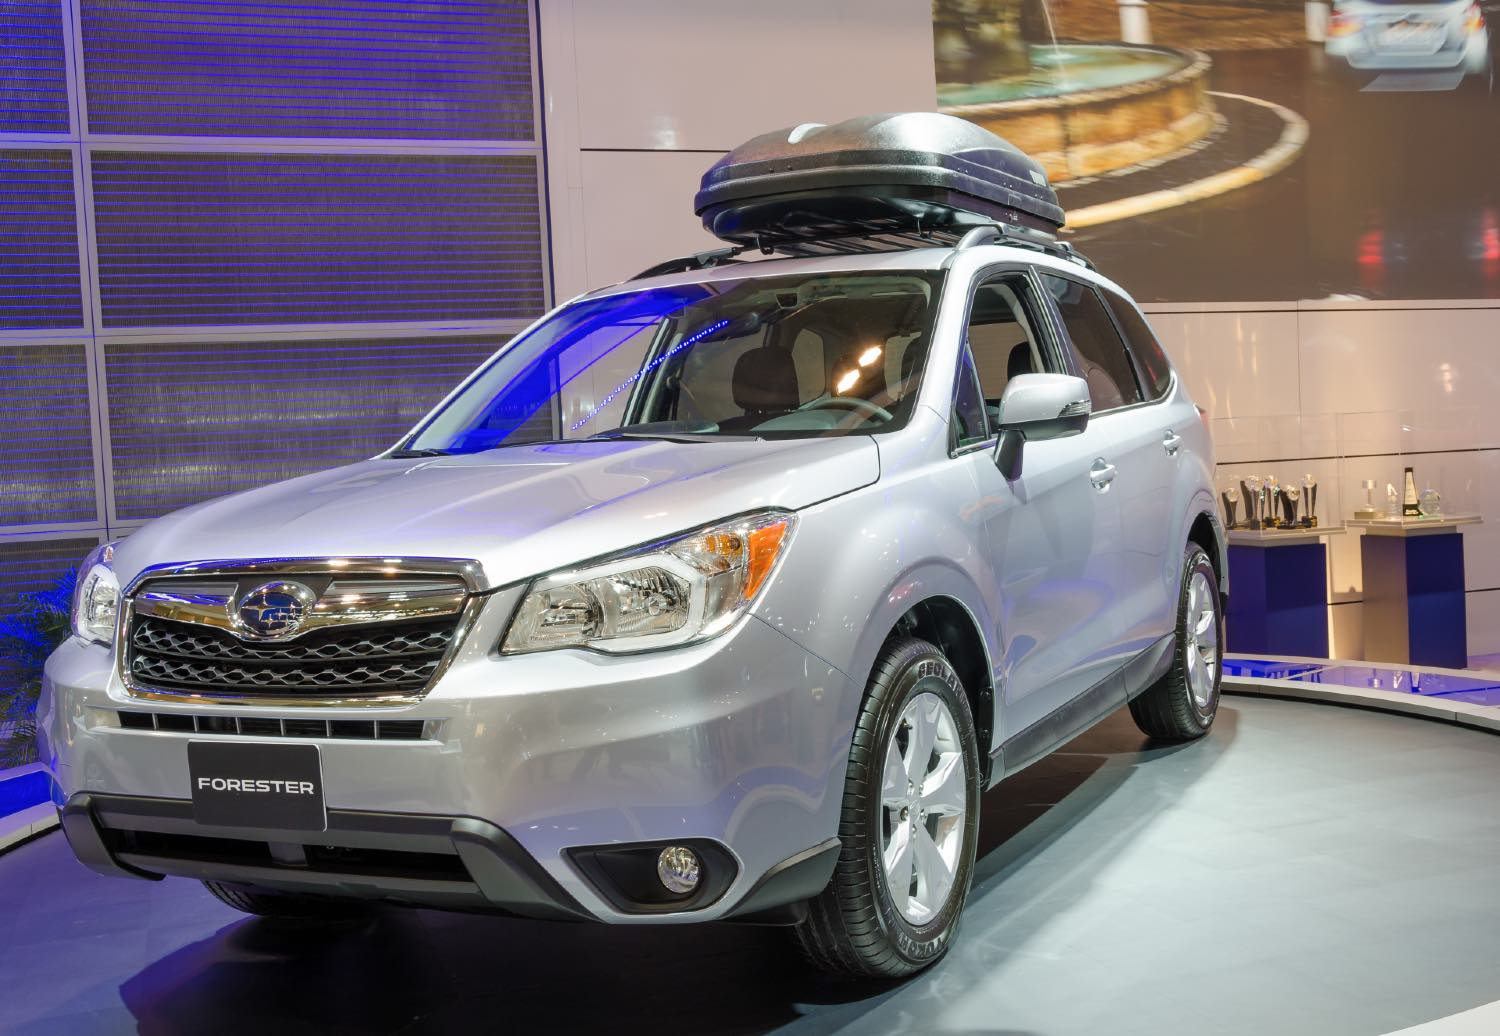 A 2014 Subaru Forester on display at an auto show.